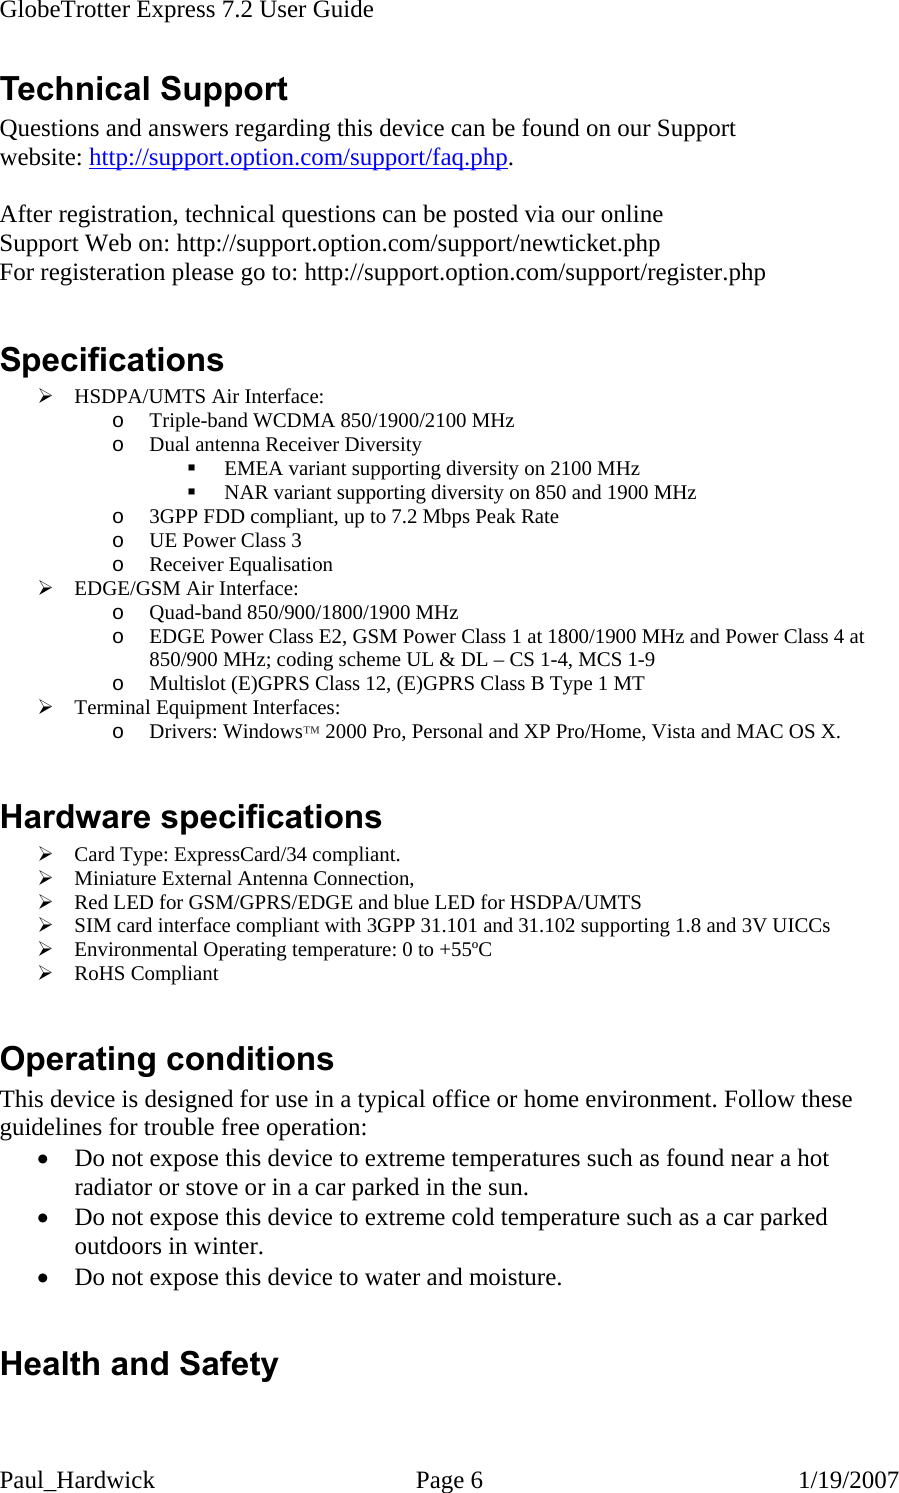 GlobeTrotter Express 7.2 User Guide   Paul_Hardwick Page 6  1/19/2007 Technical Support Questions and answers regarding this device can be found on our Support website: http://support.option.com/support/faq.php.  After registration, technical questions can be posted via our online Support Web on: http://support.option.com/support/newticket.php For registeration please go to: http://support.option.com/support/register.php  Specifications ¾ HSDPA/UMTS Air Interface: o Triple-band WCDMA 850/1900/2100 MHz  o Dual antenna Receiver Diversity  EMEA variant supporting diversity on 2100 MHz  NAR variant supporting diversity on 850 and 1900 MHz o 3GPP FDD compliant, up to 7.2 Mbps Peak Rate o UE Power Class 3 o Receiver Equalisation ¾ EDGE/GSM Air Interface: o Quad-band 850/900/1800/1900 MHz o EDGE Power Class E2, GSM Power Class 1 at 1800/1900 MHz and Power Class 4 at 850/900 MHz; coding scheme UL &amp; DL – CS 1-4, MCS 1-9 o Multislot (E)GPRS Class 12, (E)GPRS Class B Type 1 MT ¾ Terminal Equipment Interfaces: o Drivers: Windows™ 2000 Pro, Personal and XP Pro/Home, Vista and MAC OS X.   Hardware specifications ¾ Card Type: ExpressCard/34 compliant. ¾ Miniature External Antenna Connection, ¾ Red LED for GSM/GPRS/EDGE and blue LED for HSDPA/UMTS ¾ SIM card interface compliant with 3GPP 31.101 and 31.102 supporting 1.8 and 3V UICCs ¾ Environmental Operating temperature: 0 to +55ºC ¾ RoHS Compliant  Operating conditions This device is designed for use in a typical office or home environment. Follow these guidelines for trouble free operation: • Do not expose this device to extreme temperatures such as found near a hot radiator or stove or in a car parked in the sun. • Do not expose this device to extreme cold temperature such as a car parked outdoors in winter.  • Do not expose this device to water and moisture.  Health and Safety  